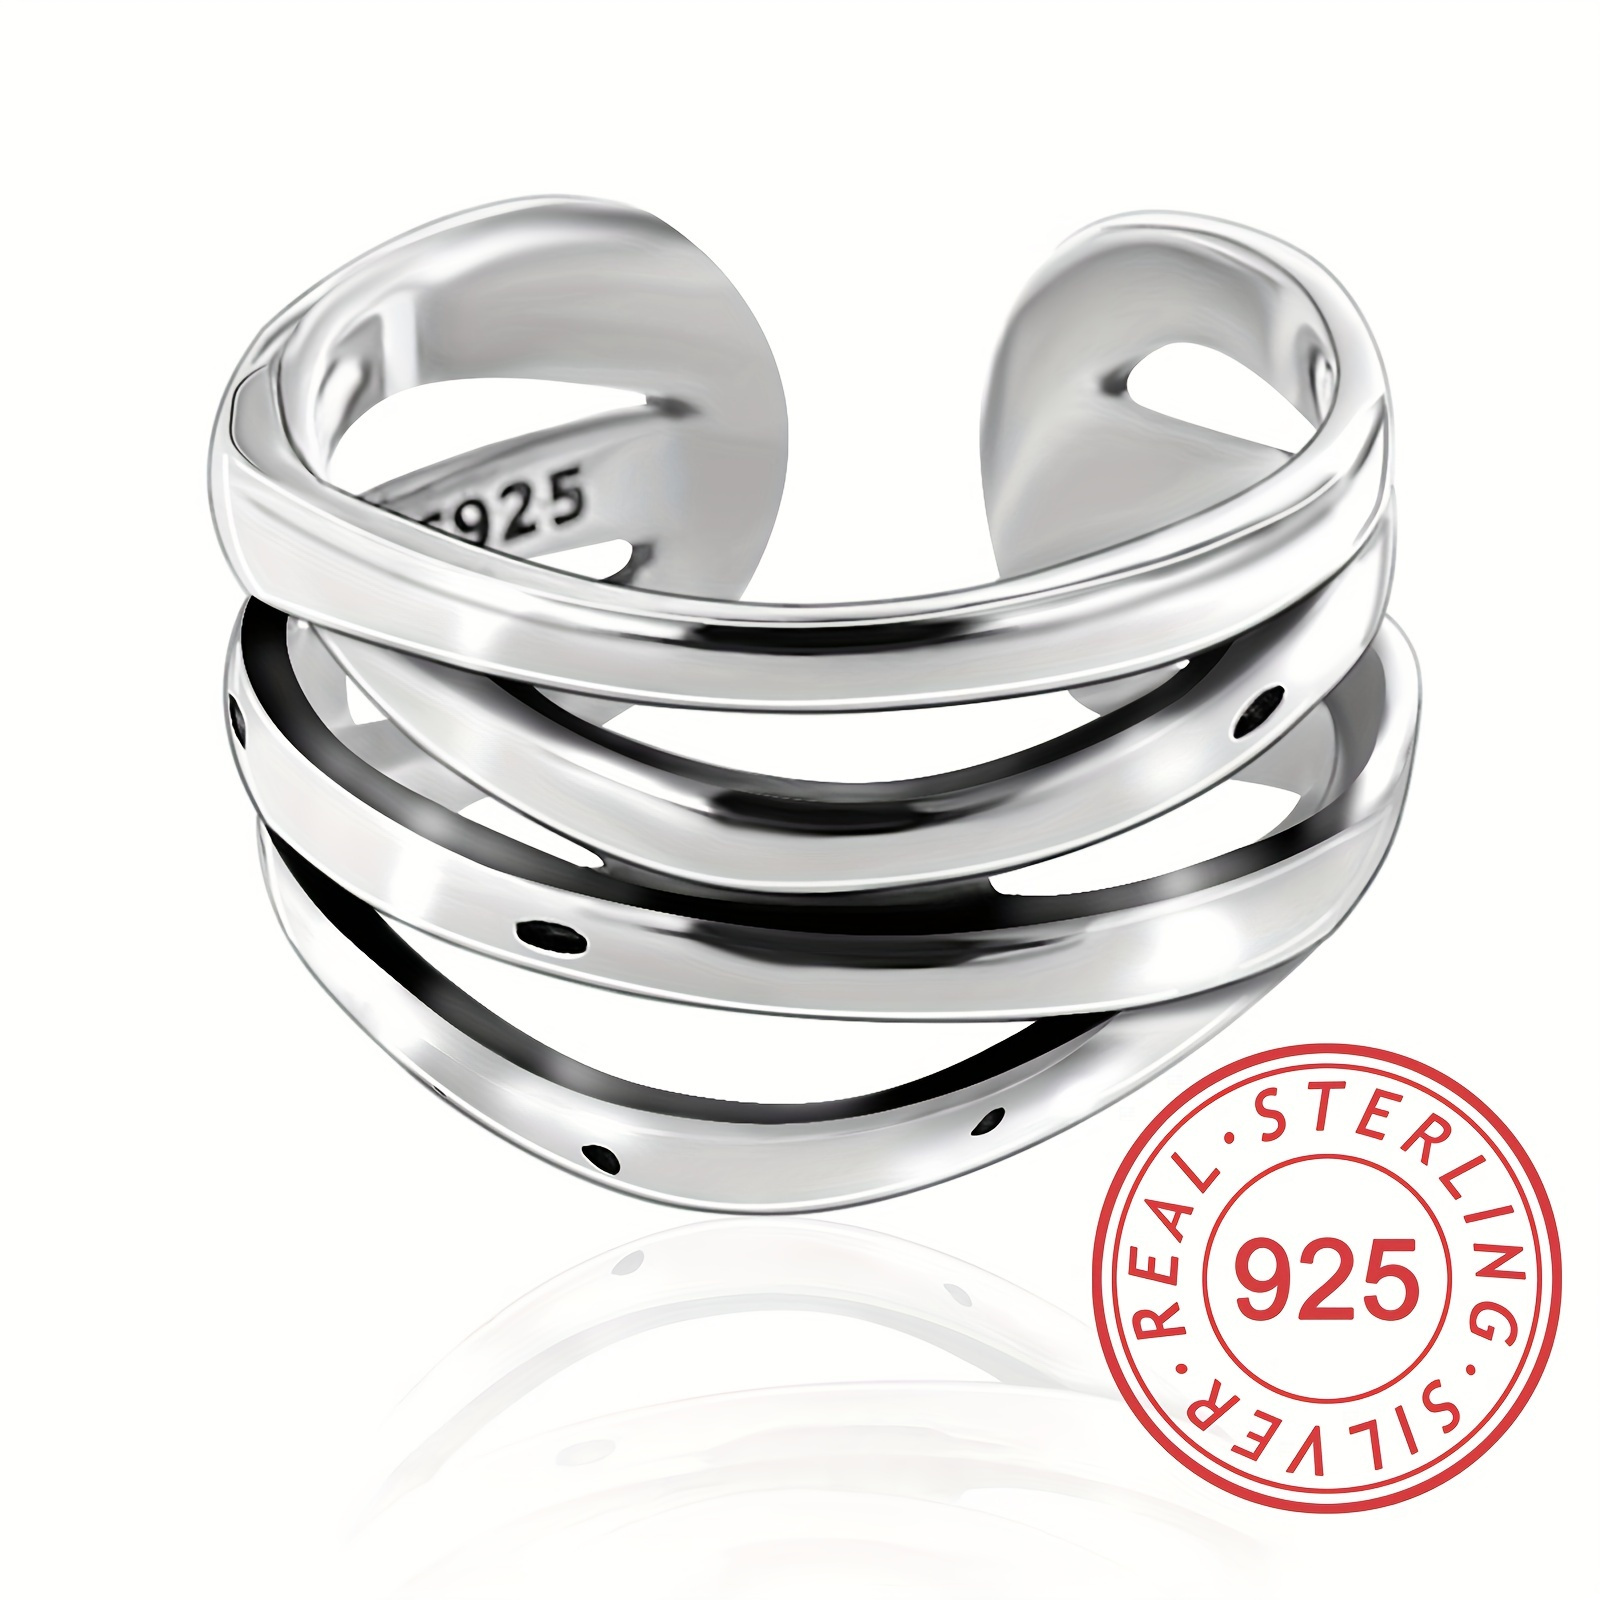 

925 Sterling Silver Cuff Ring - Multi-layer Design, Adjustable, High-quality, Vintage-inspired, Party-ready Accessory For Men And Women - Perfect Gift For Valentines Day, Daily Occasions, And